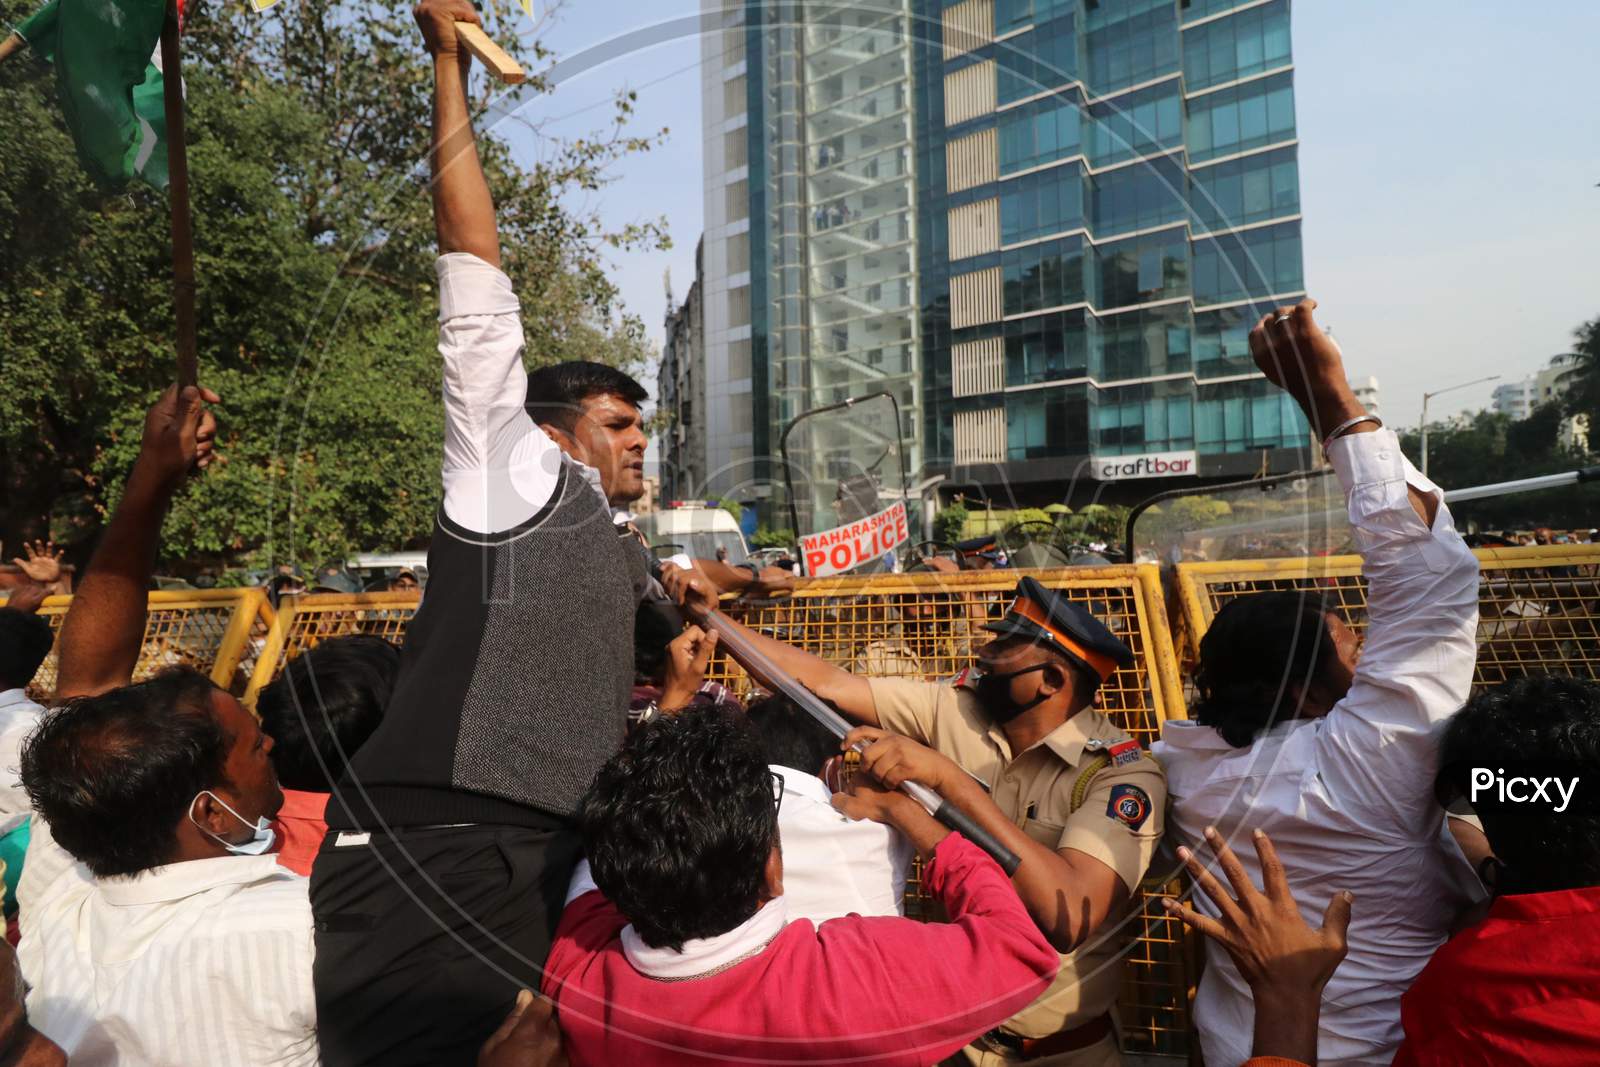 Demonstrators attempt to cross a police barricade during a protest of farmers and members of various agricultural against new farm laws passed by India's parliament, in Mumbai, India, December, 2020.